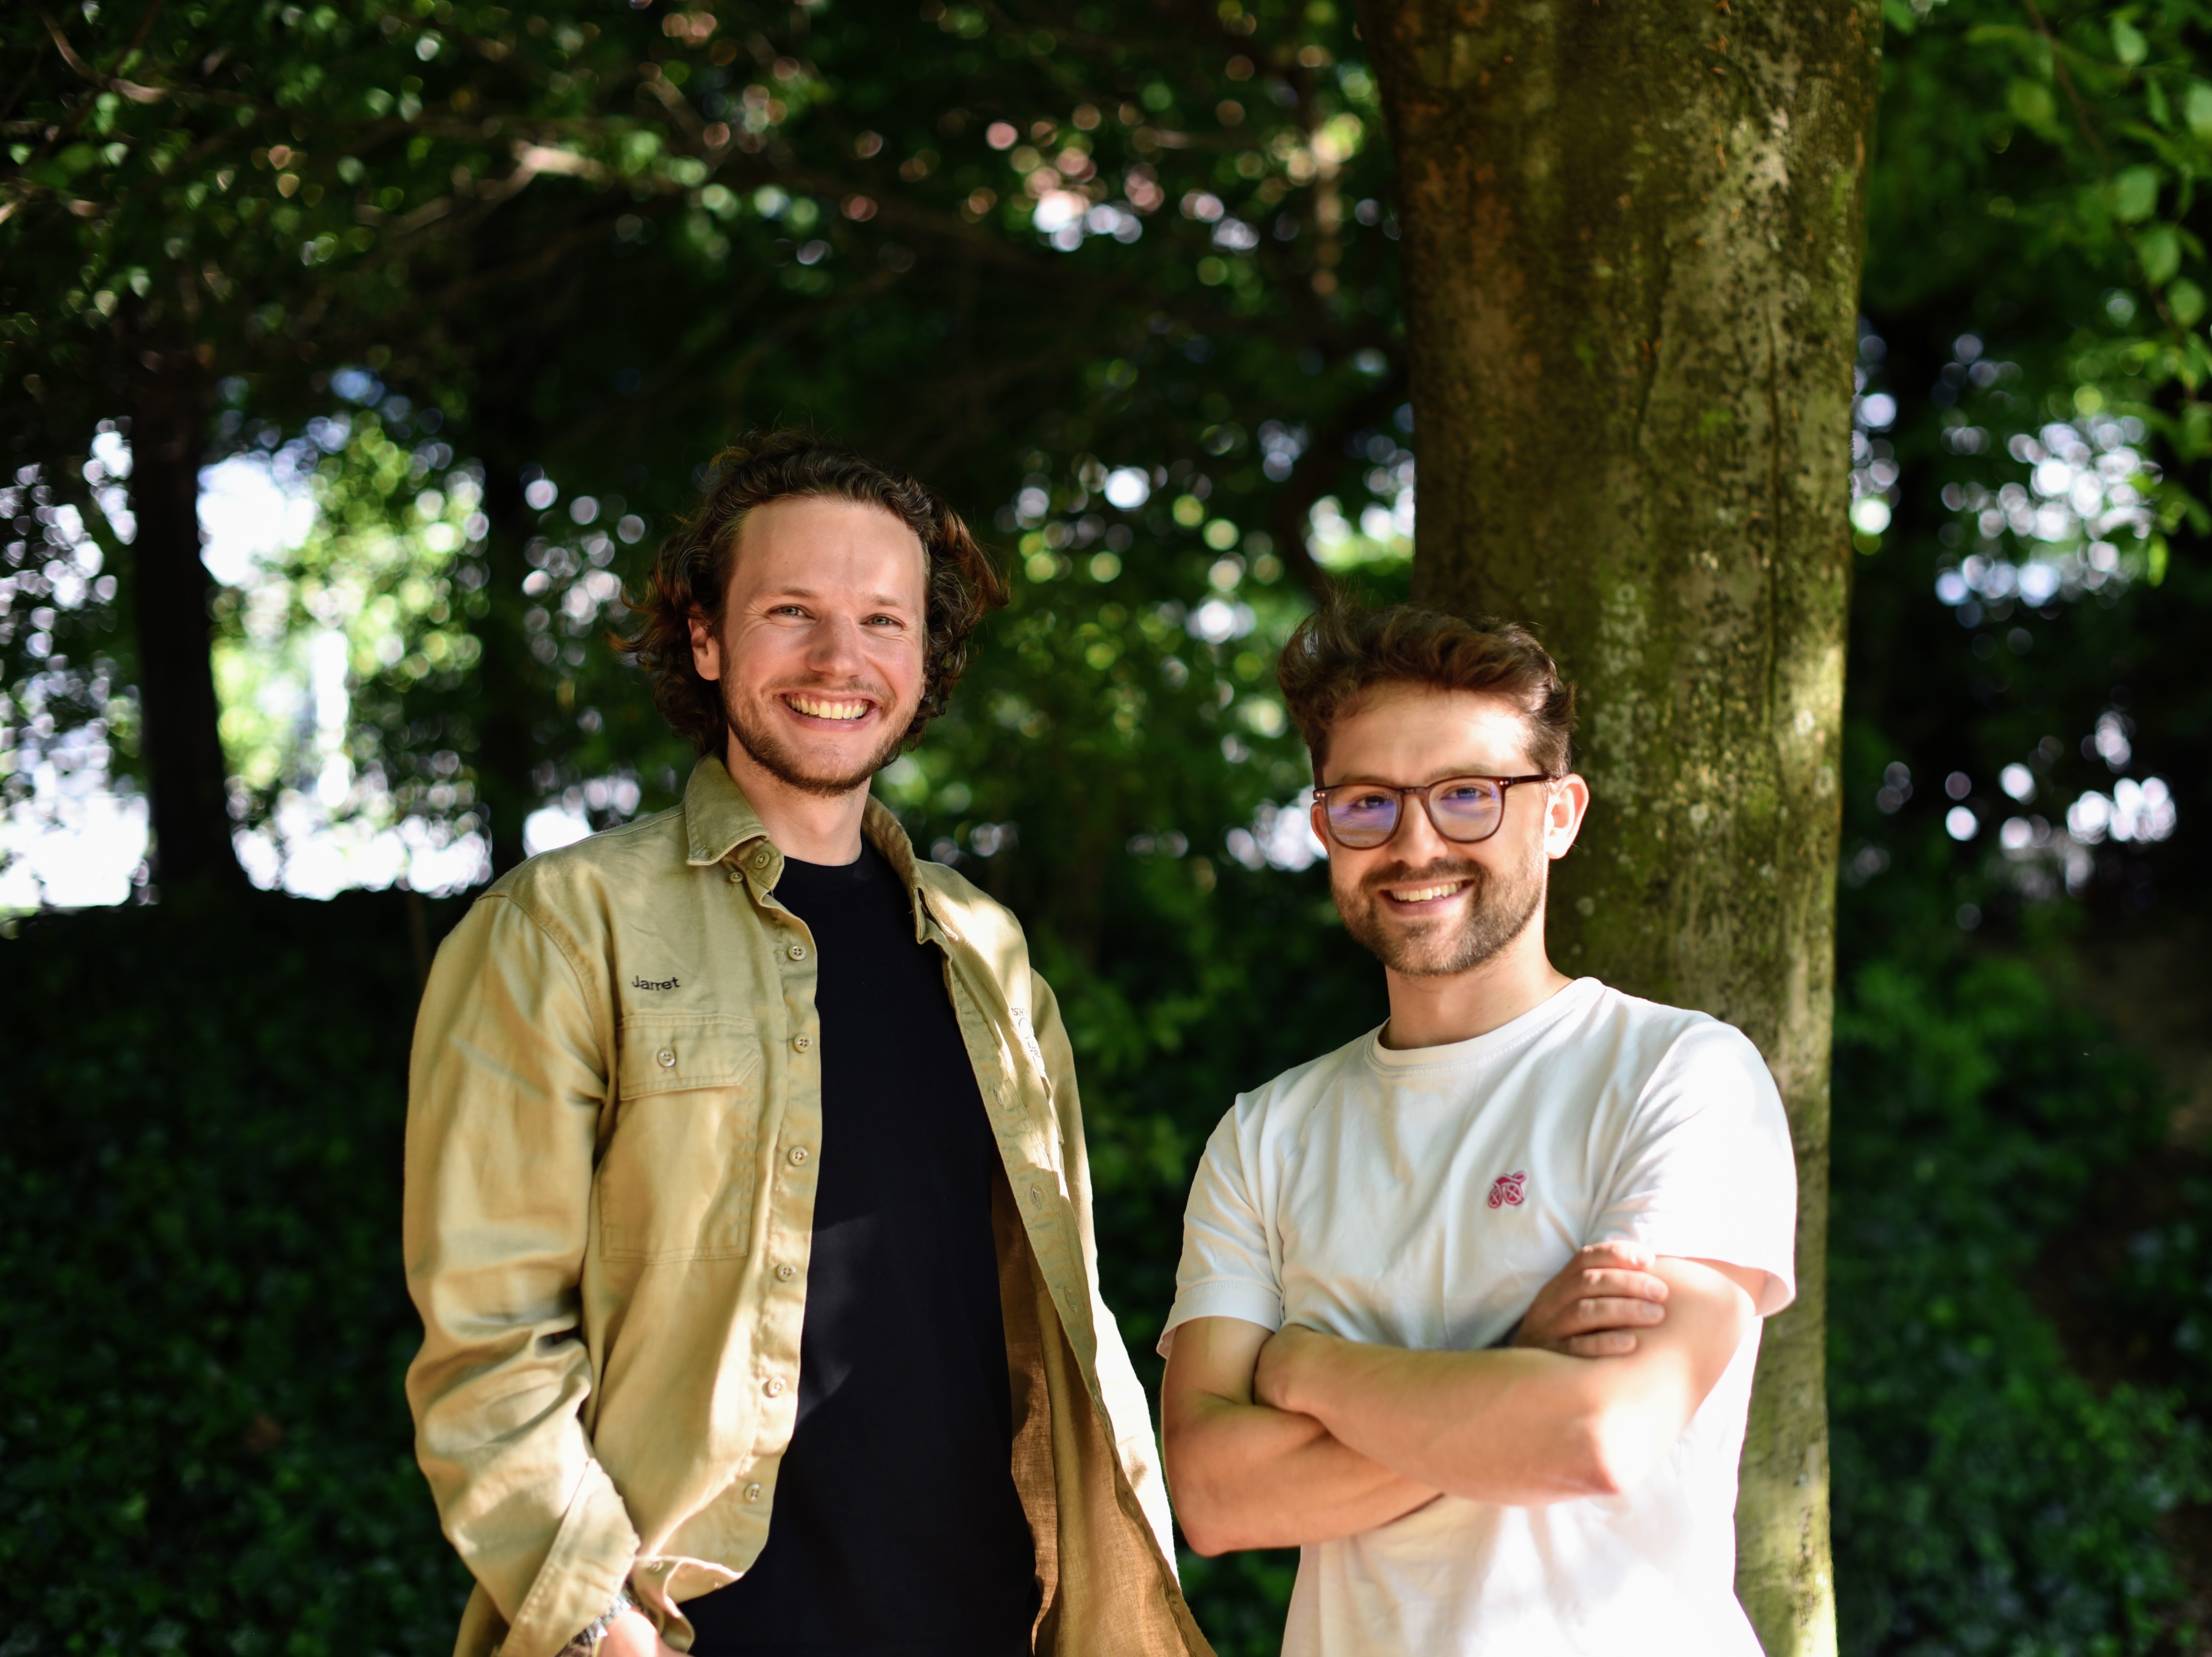 Founders of axle, Karl Bach and Archy de Berker